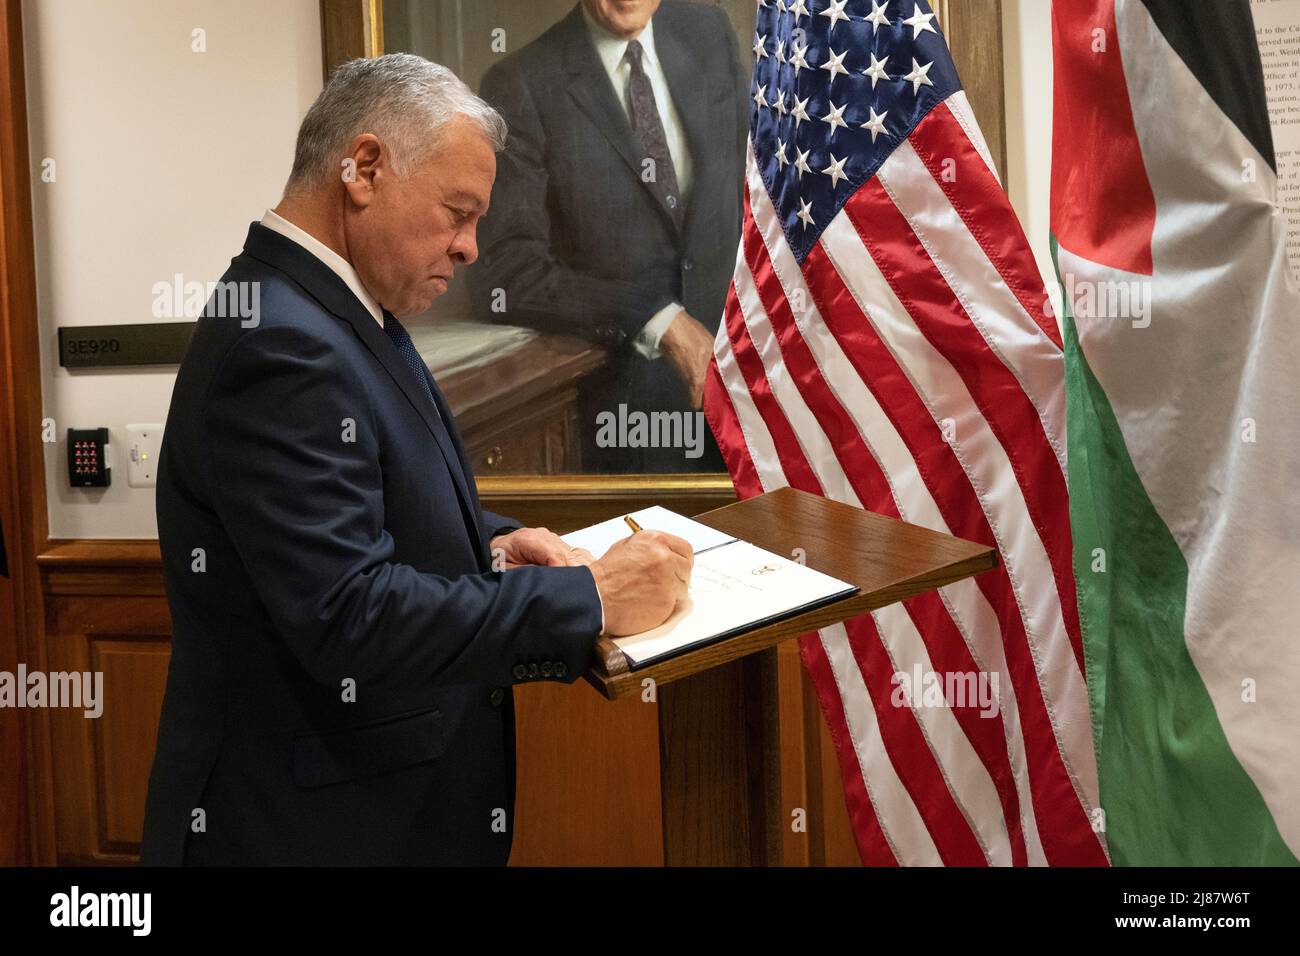 Arlington, United States Of America. 12th May, 2022. Arlington, United States of America. 12 May, 2022. King Abdullah II of Jordan, signs the guest book before the start of bilateral discussions with U.S. Secretary of Defense Lloyd J. Austin III, at the Pentagon, May 12, 2022 in Arlington, Virginia. Credit: Lisa Ferdinando/DOD/Alamy Live News Stock Photo